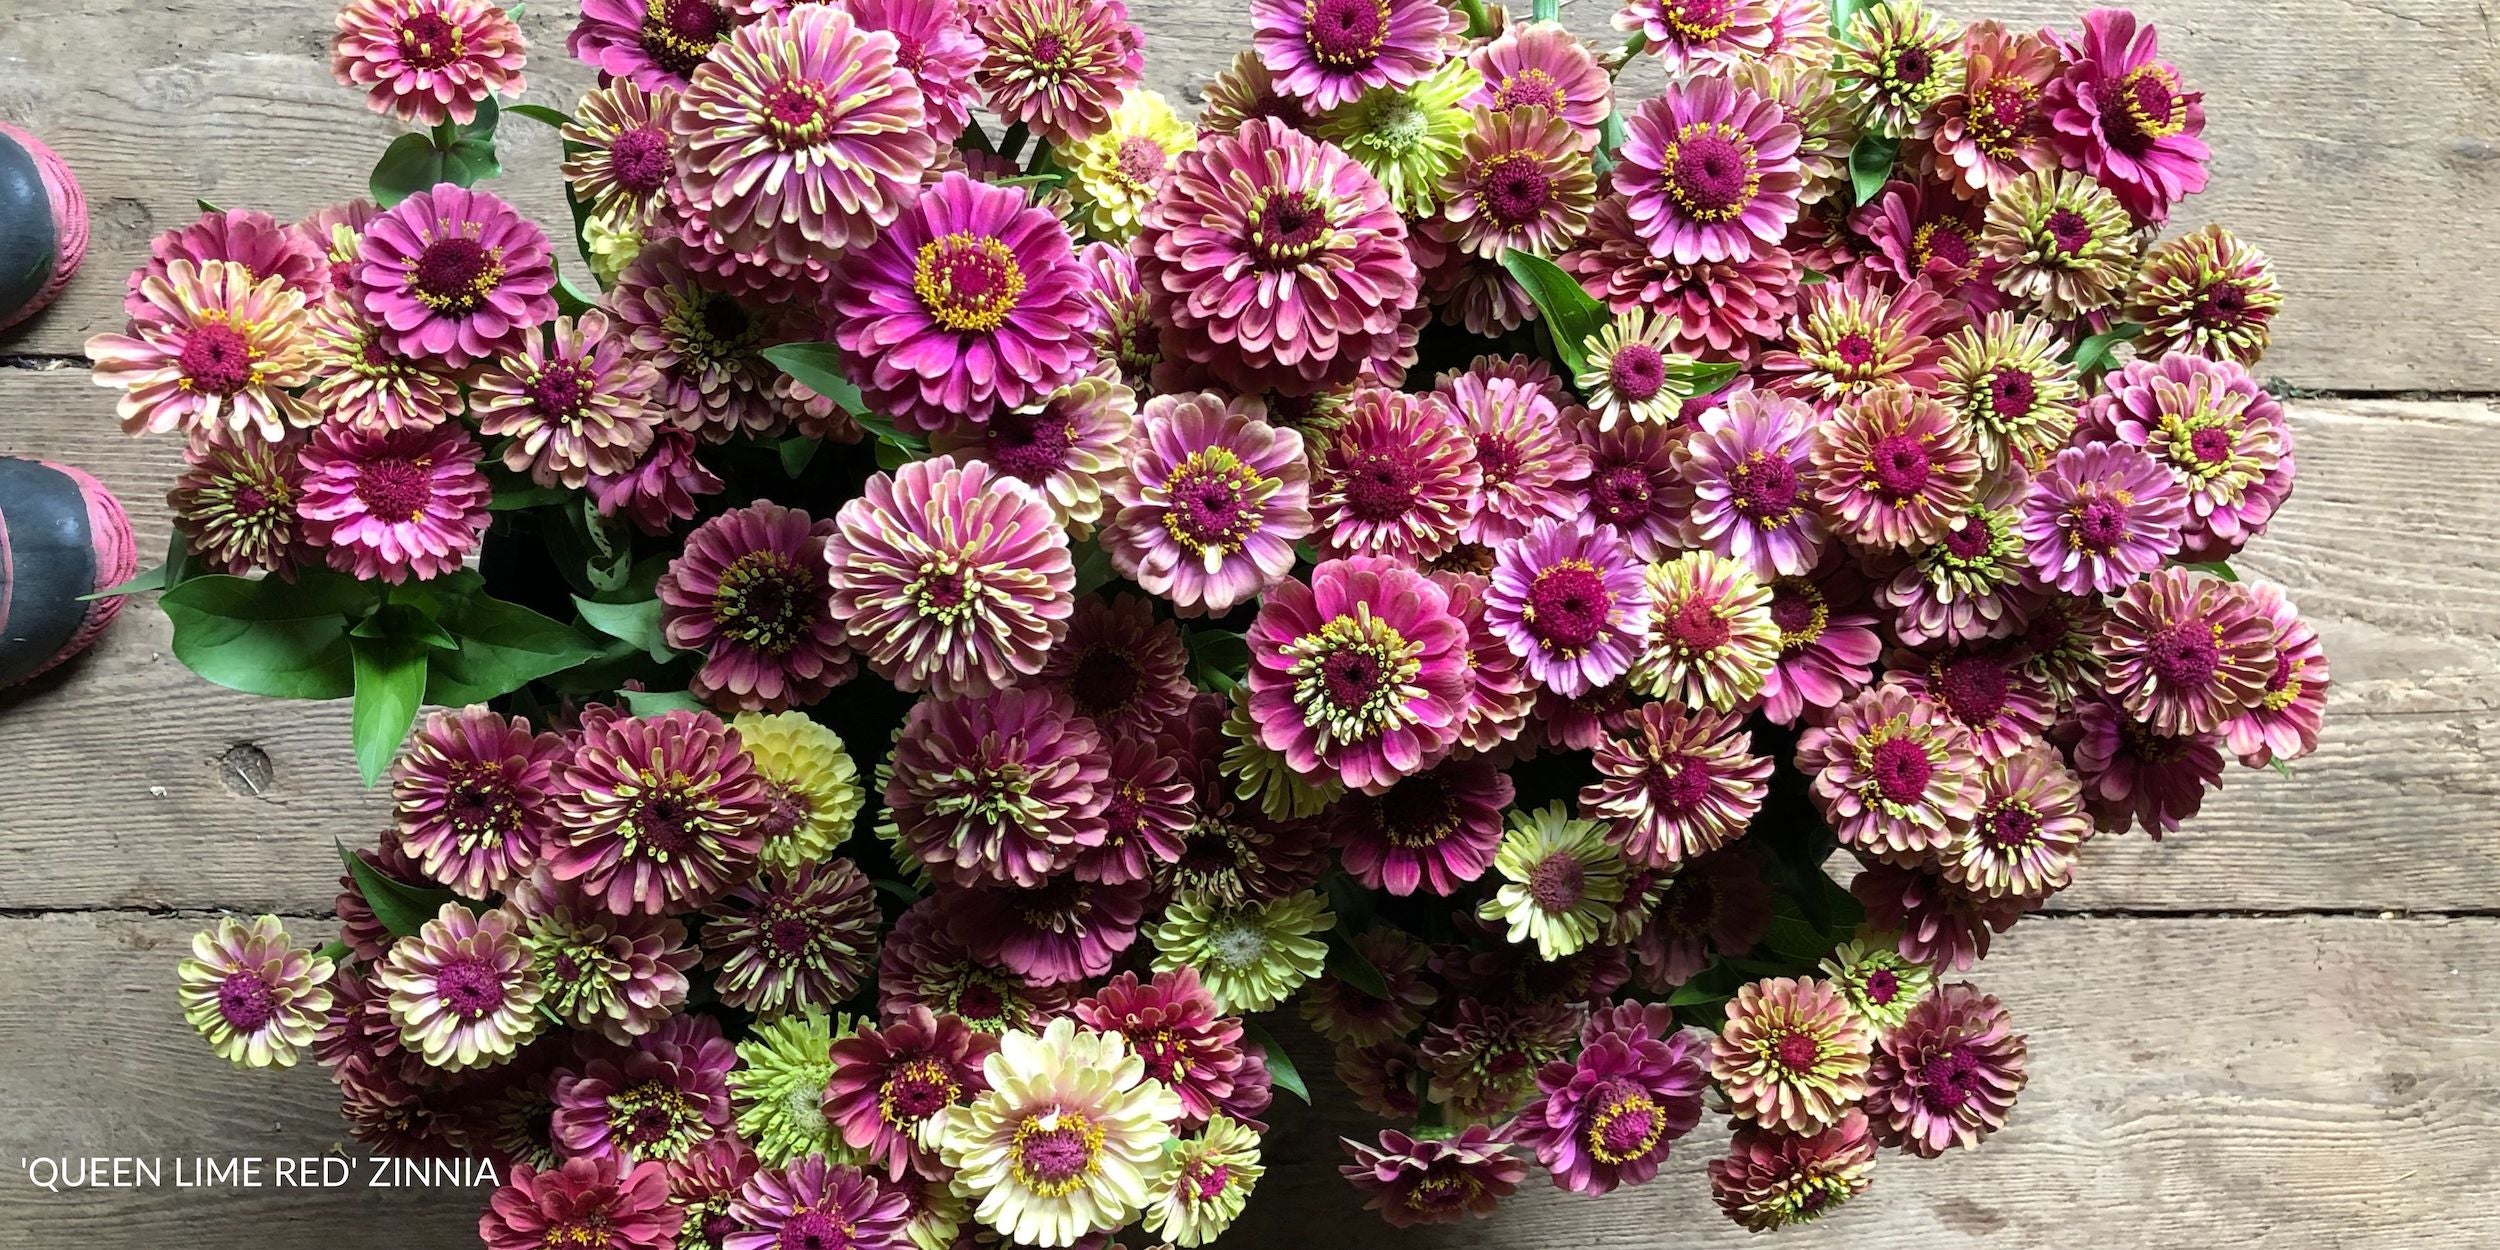 QUEEN LIME RED ZINNIA